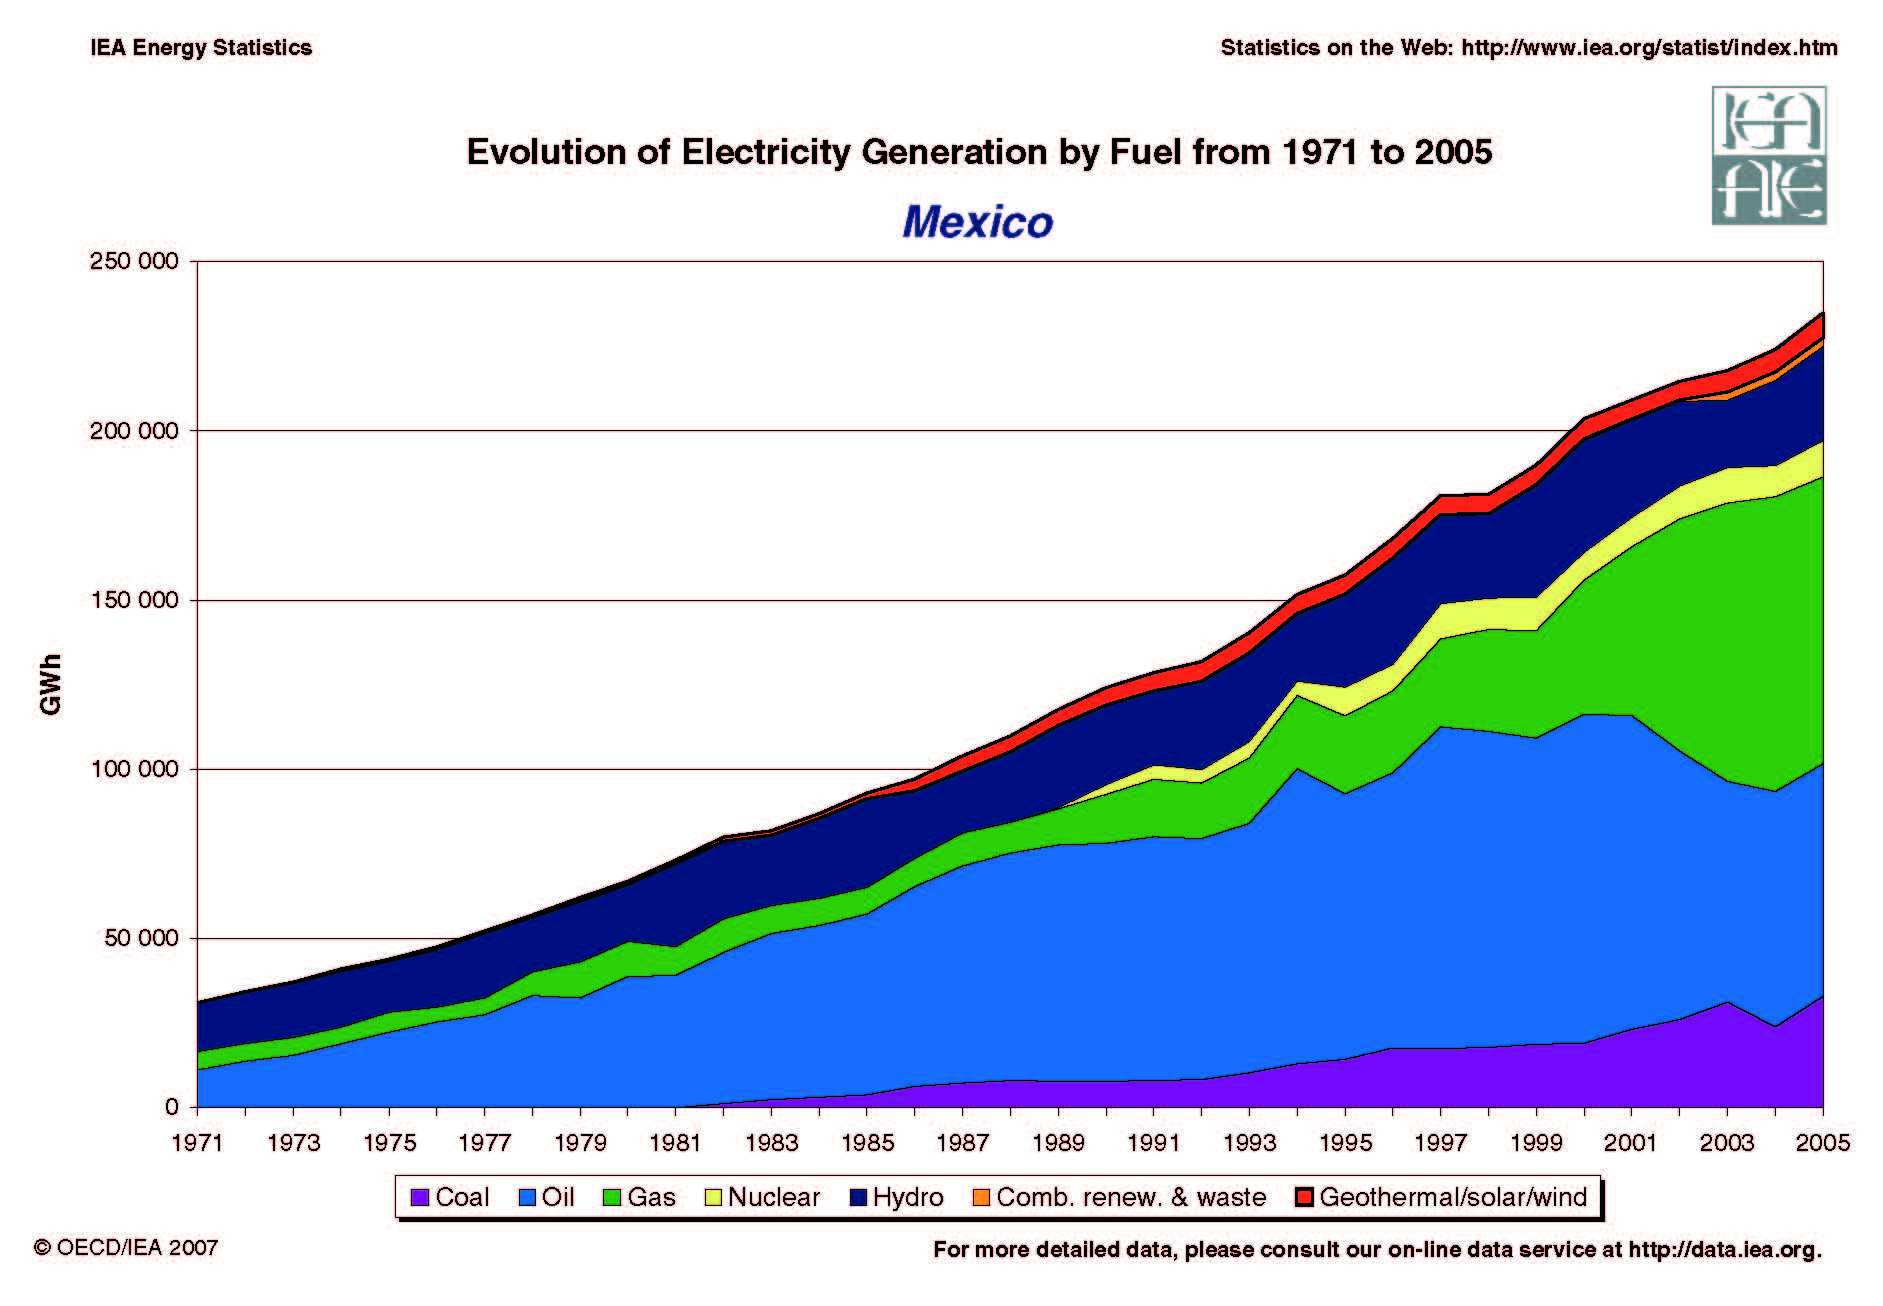 electricity generation by fuel - Mexico